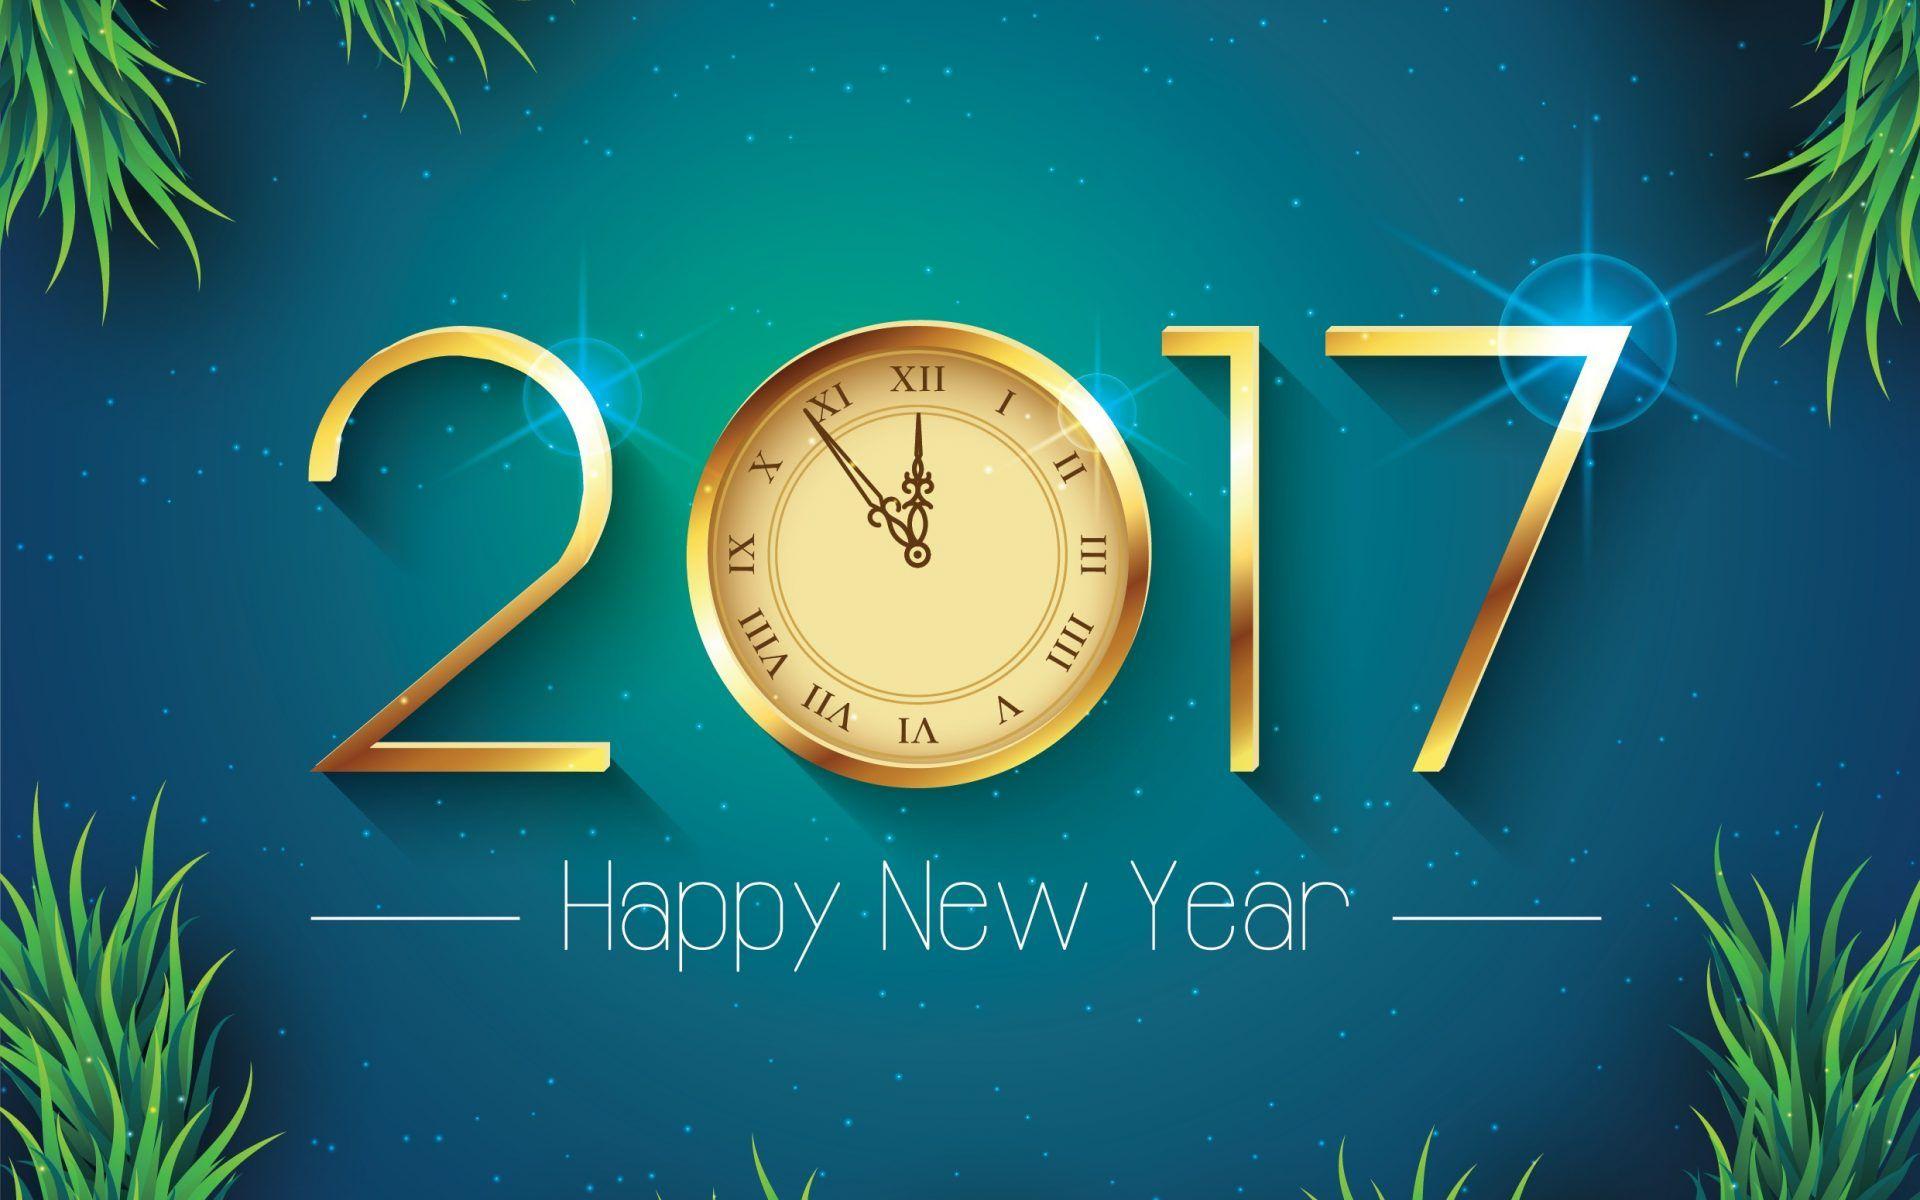 Happy New Year Wallpaper 2017: New Year 2017 Picture